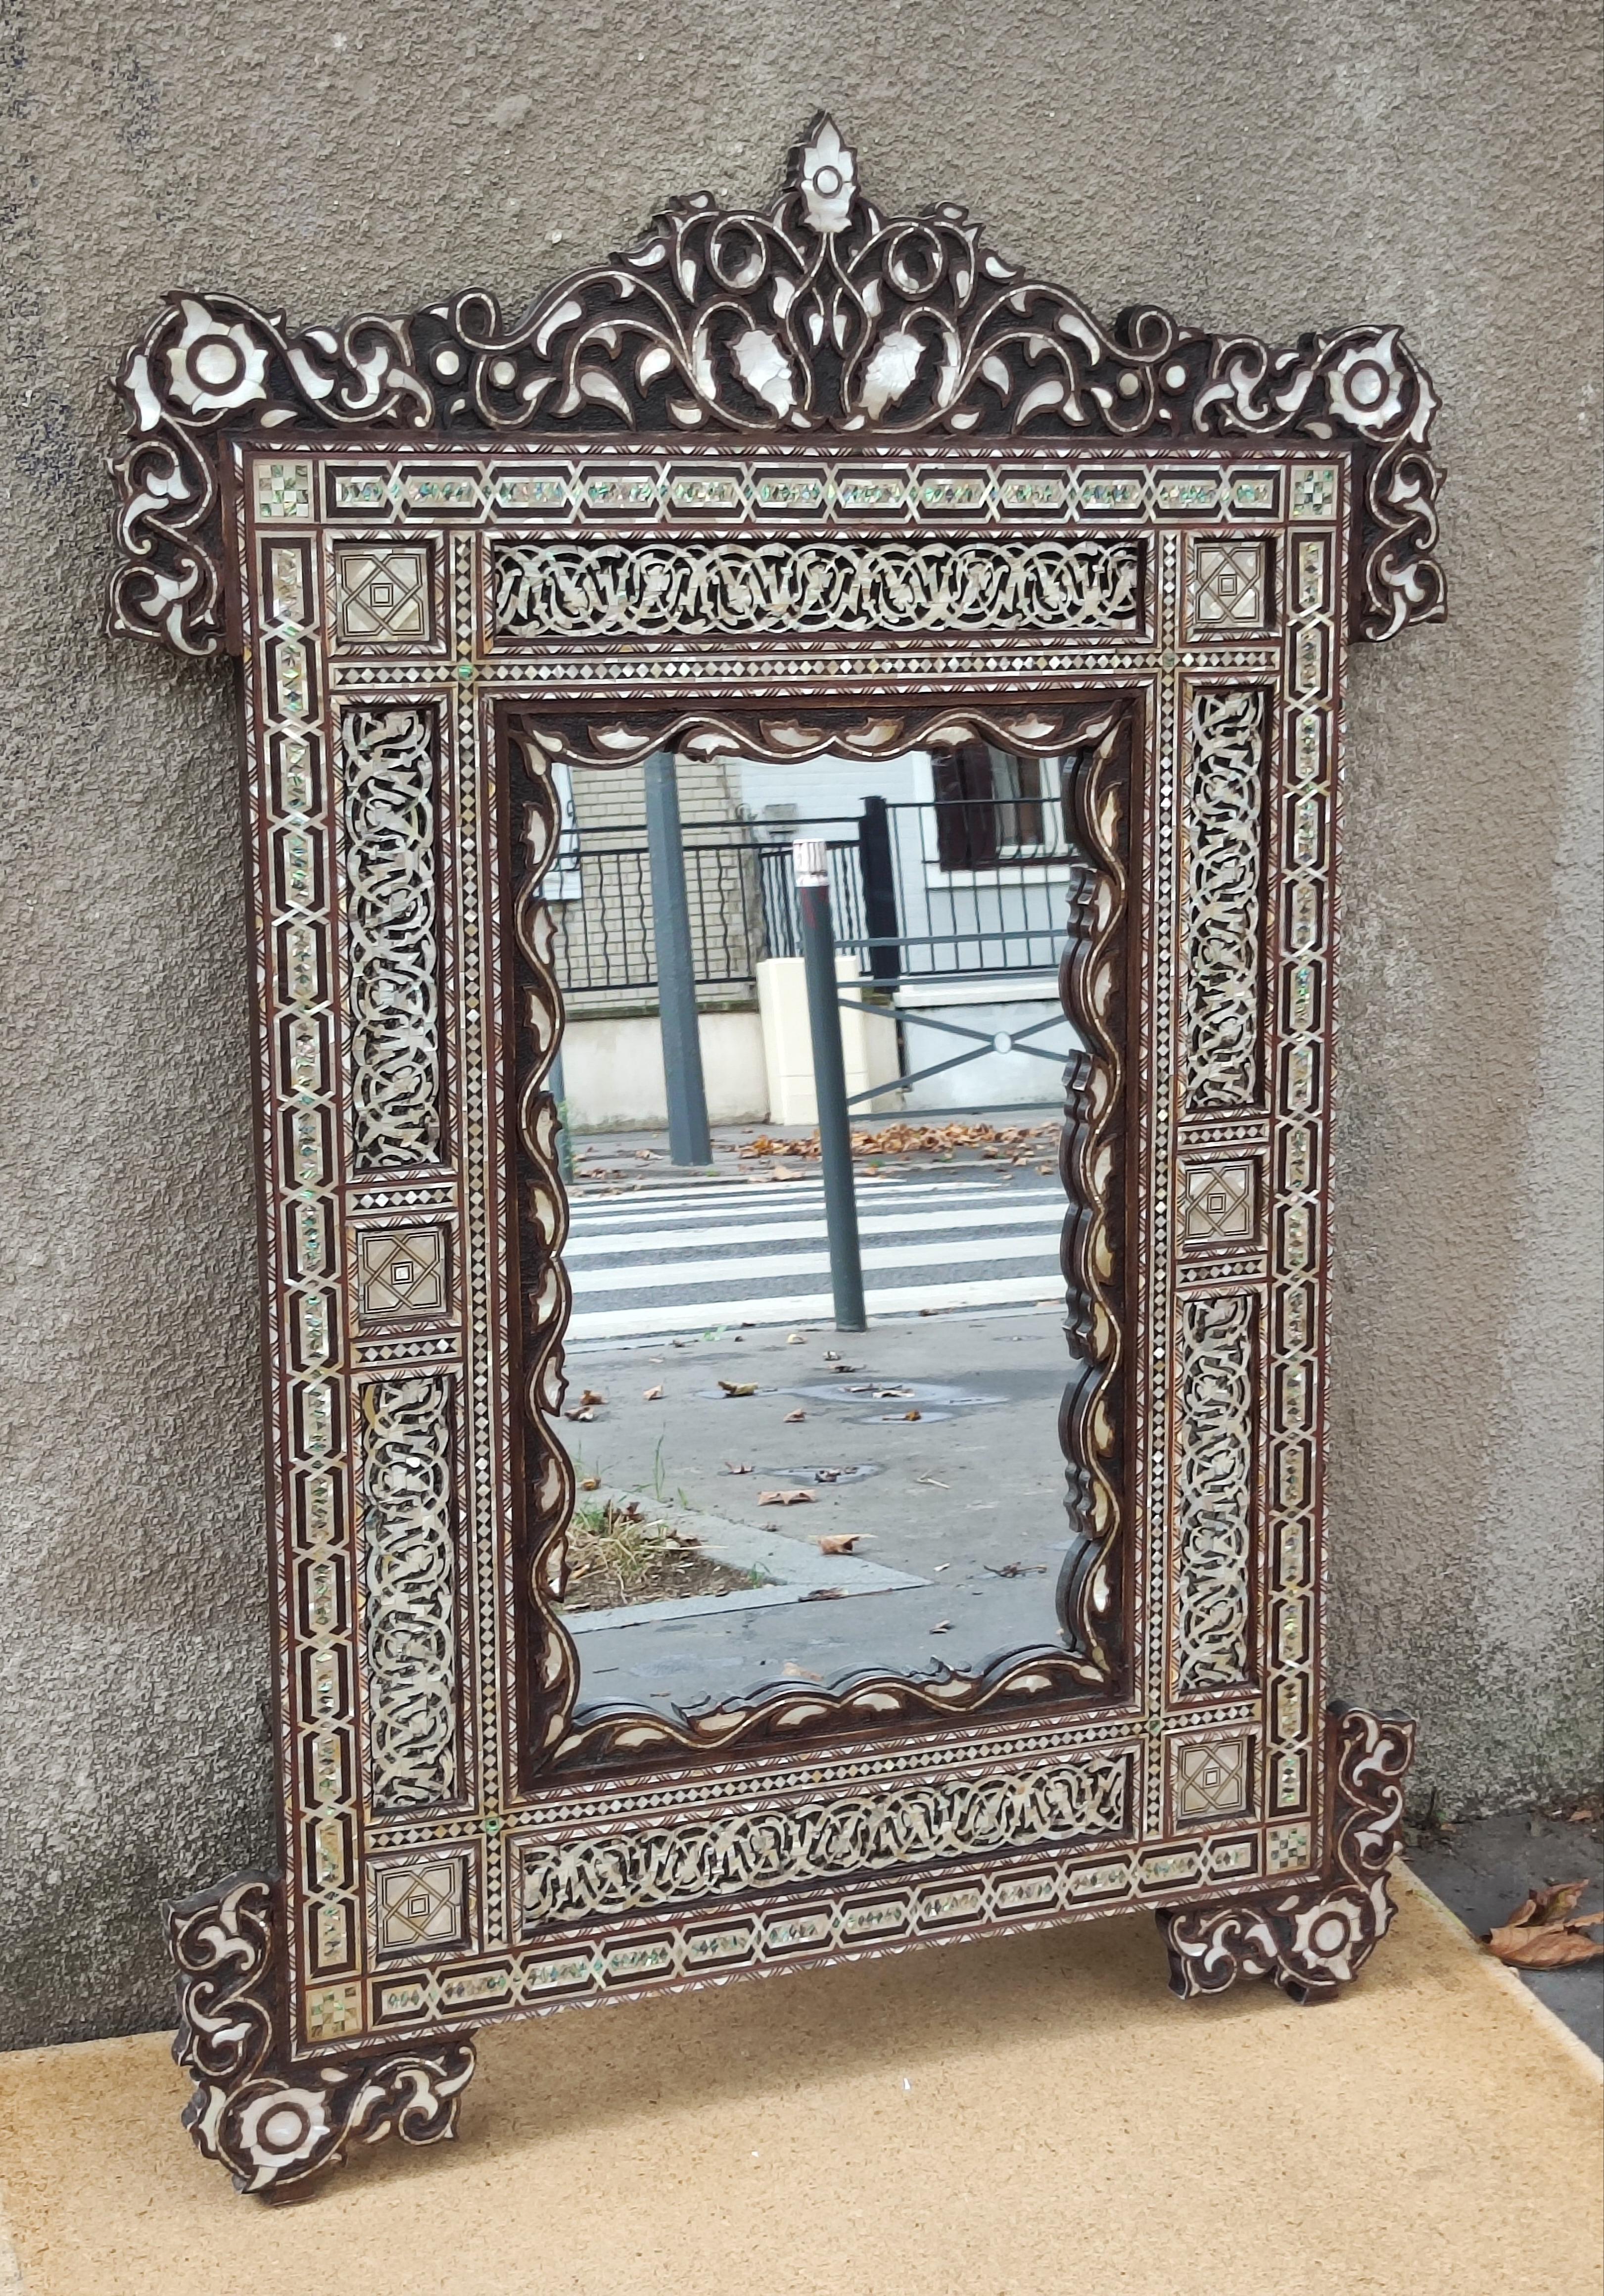 Pair of Syrian Mirrors in carved wood and inlays XIX°in excellent condition.